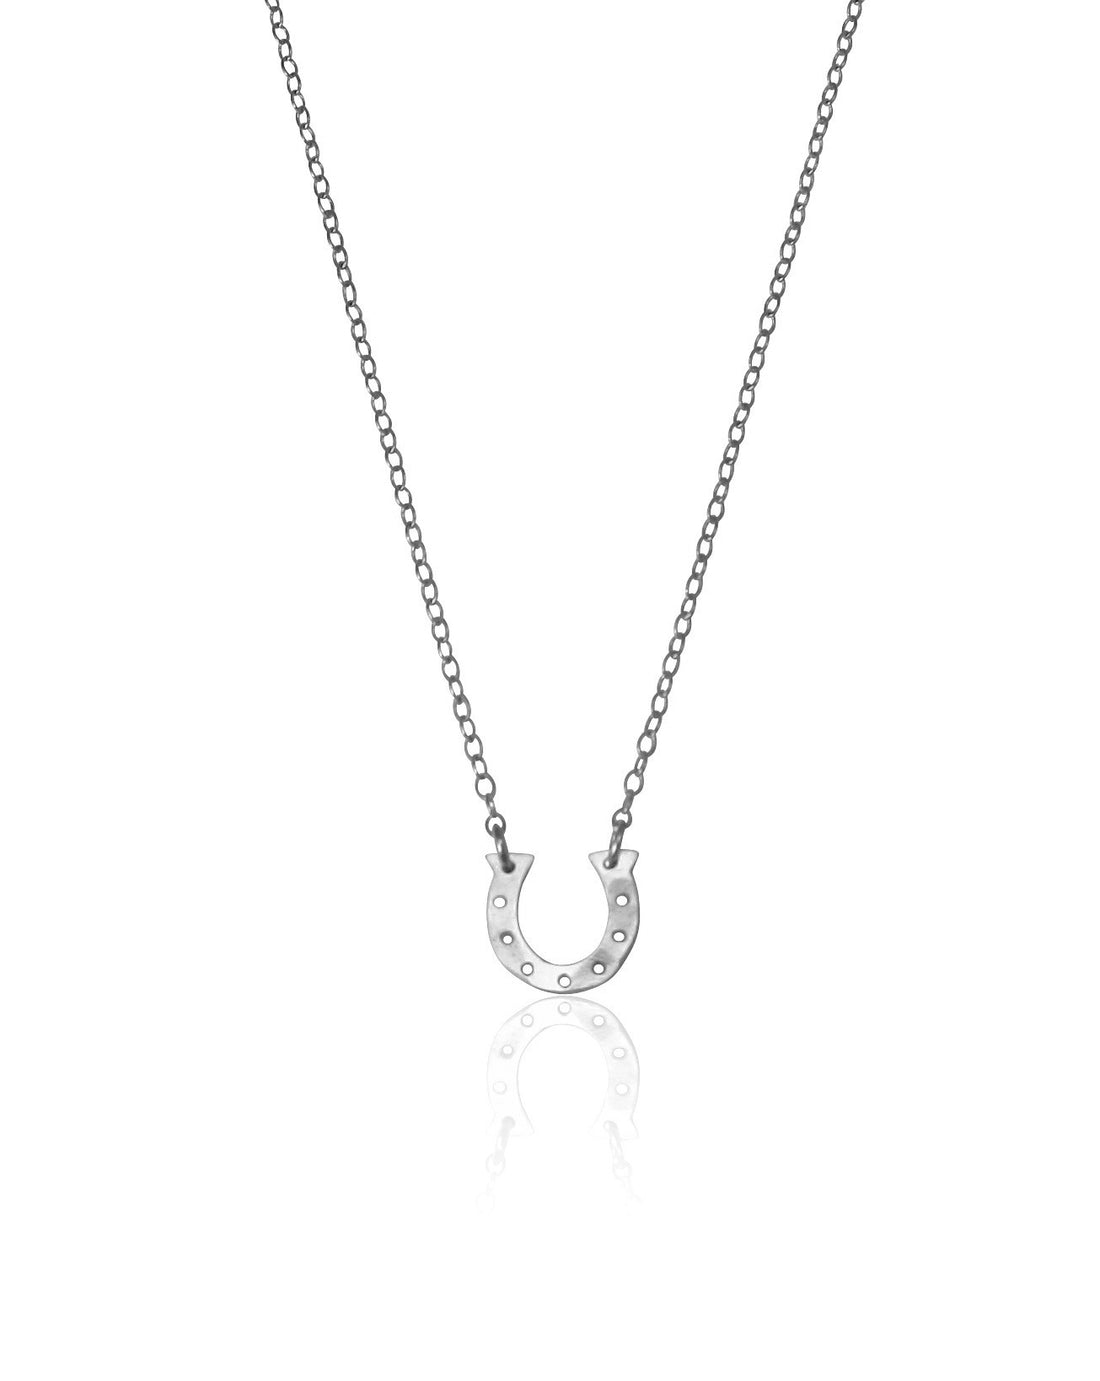 Lucky Horseshoe Necklace in Gold or Silver Colors